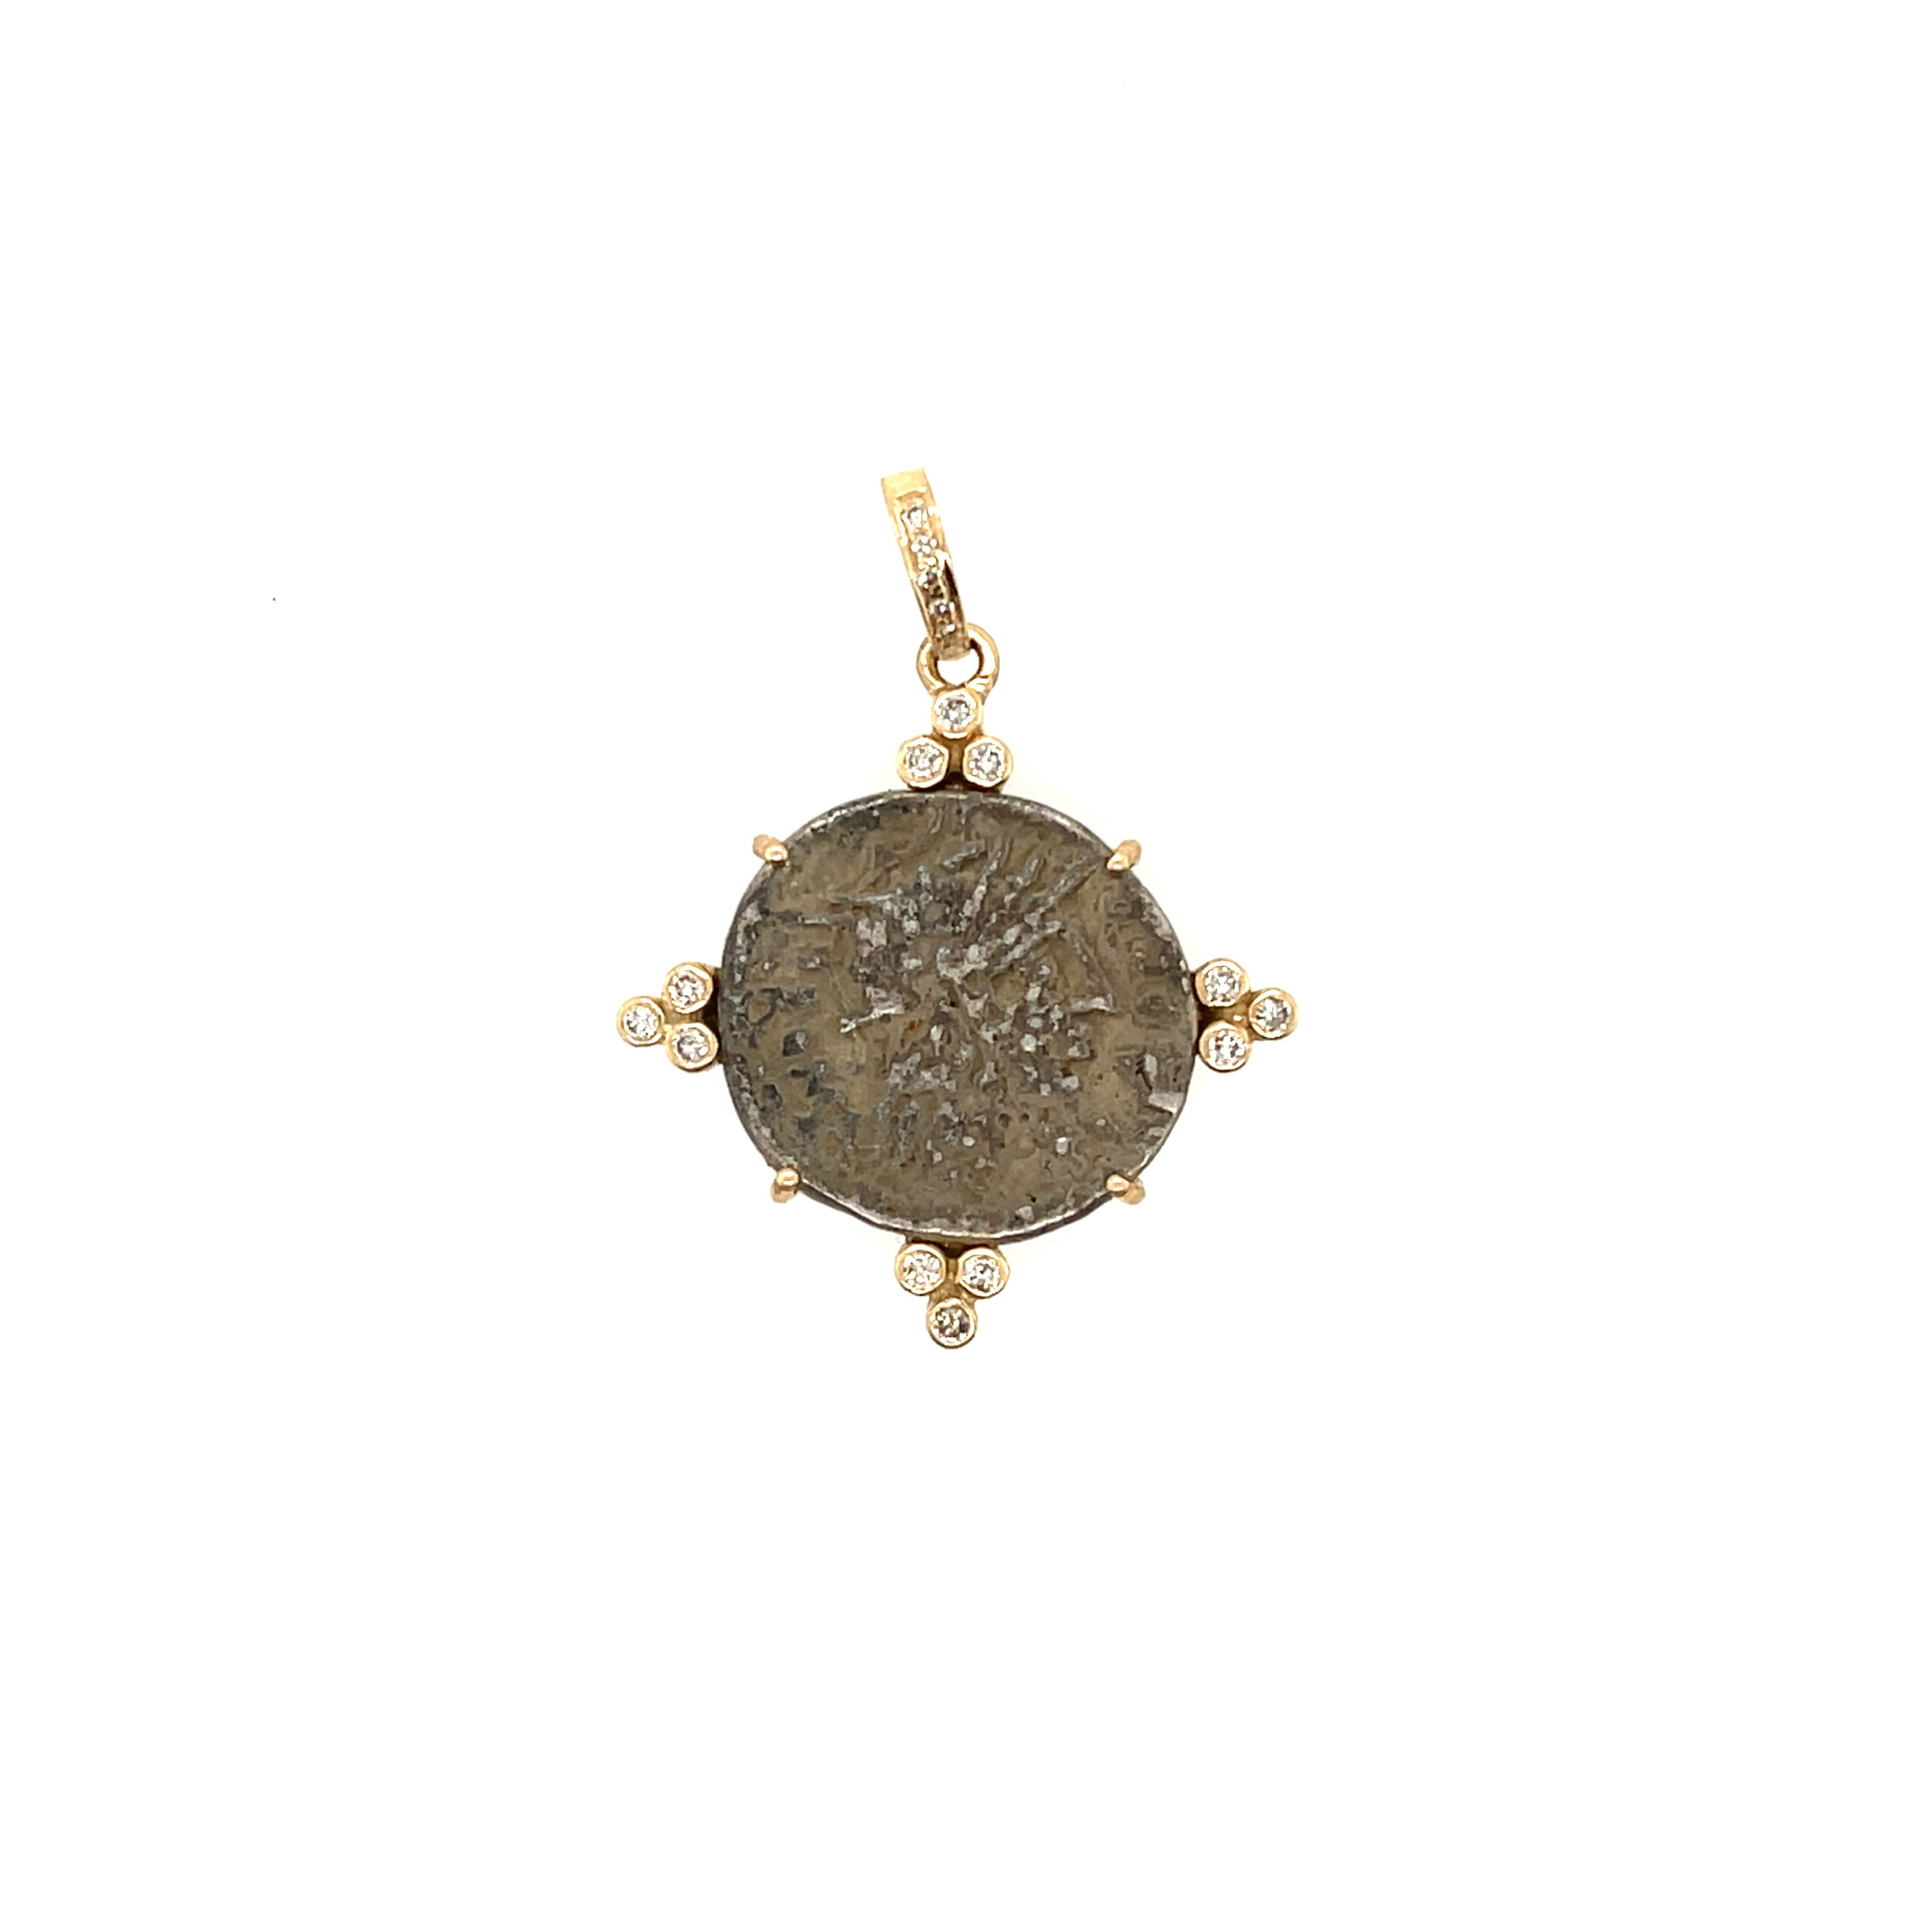 Featured image for “Embellished Roman Coin Pendant”